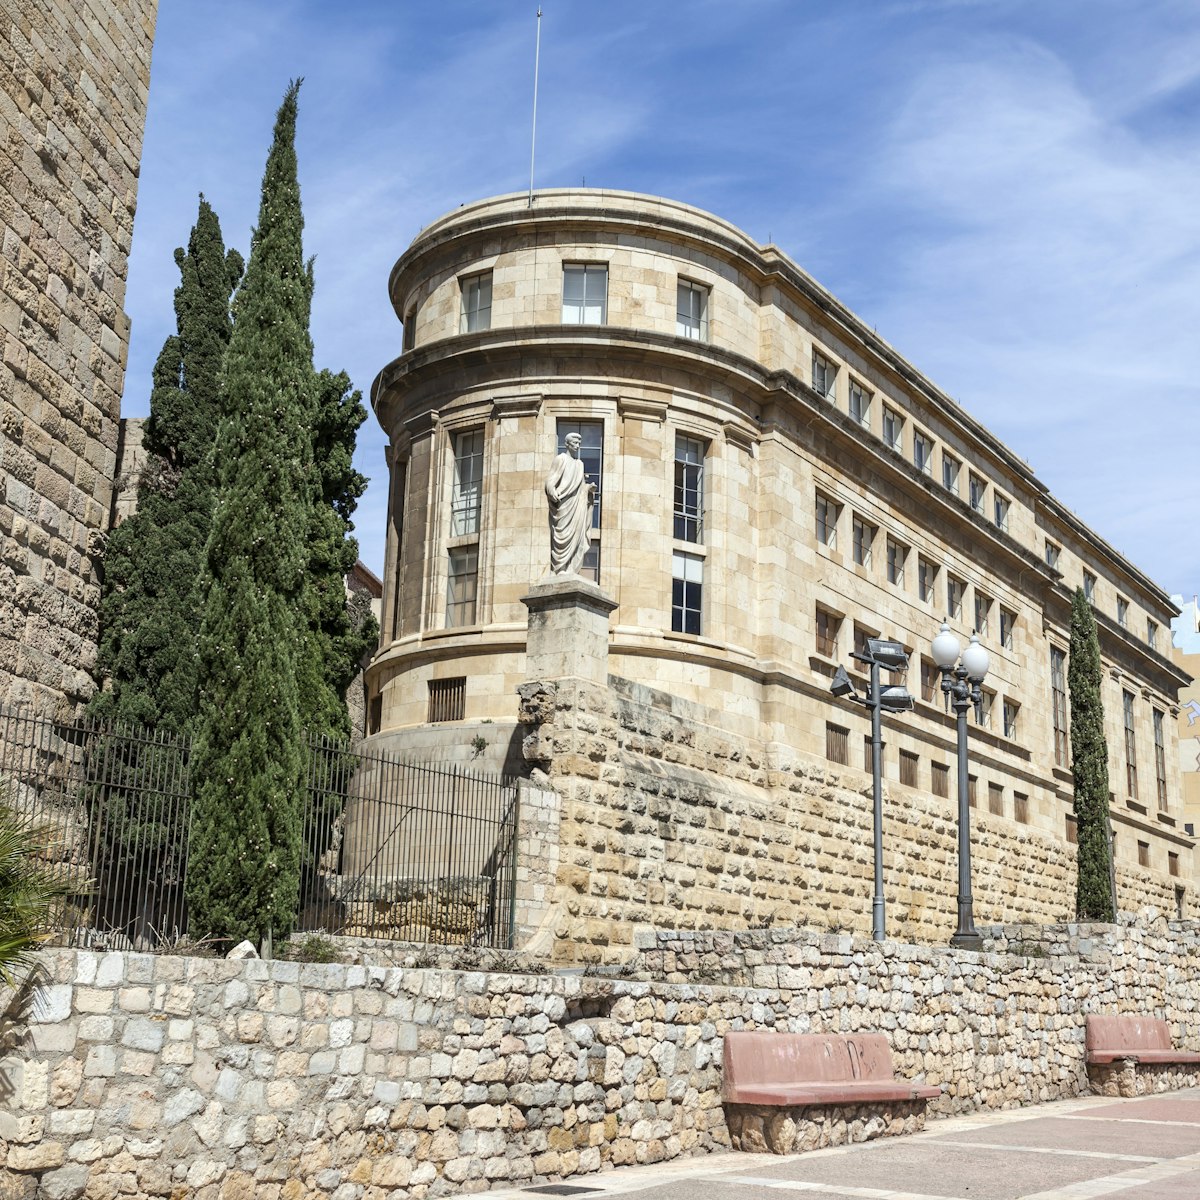 Architecture, National Archaeological Museum of Tarragona, Catalonia.